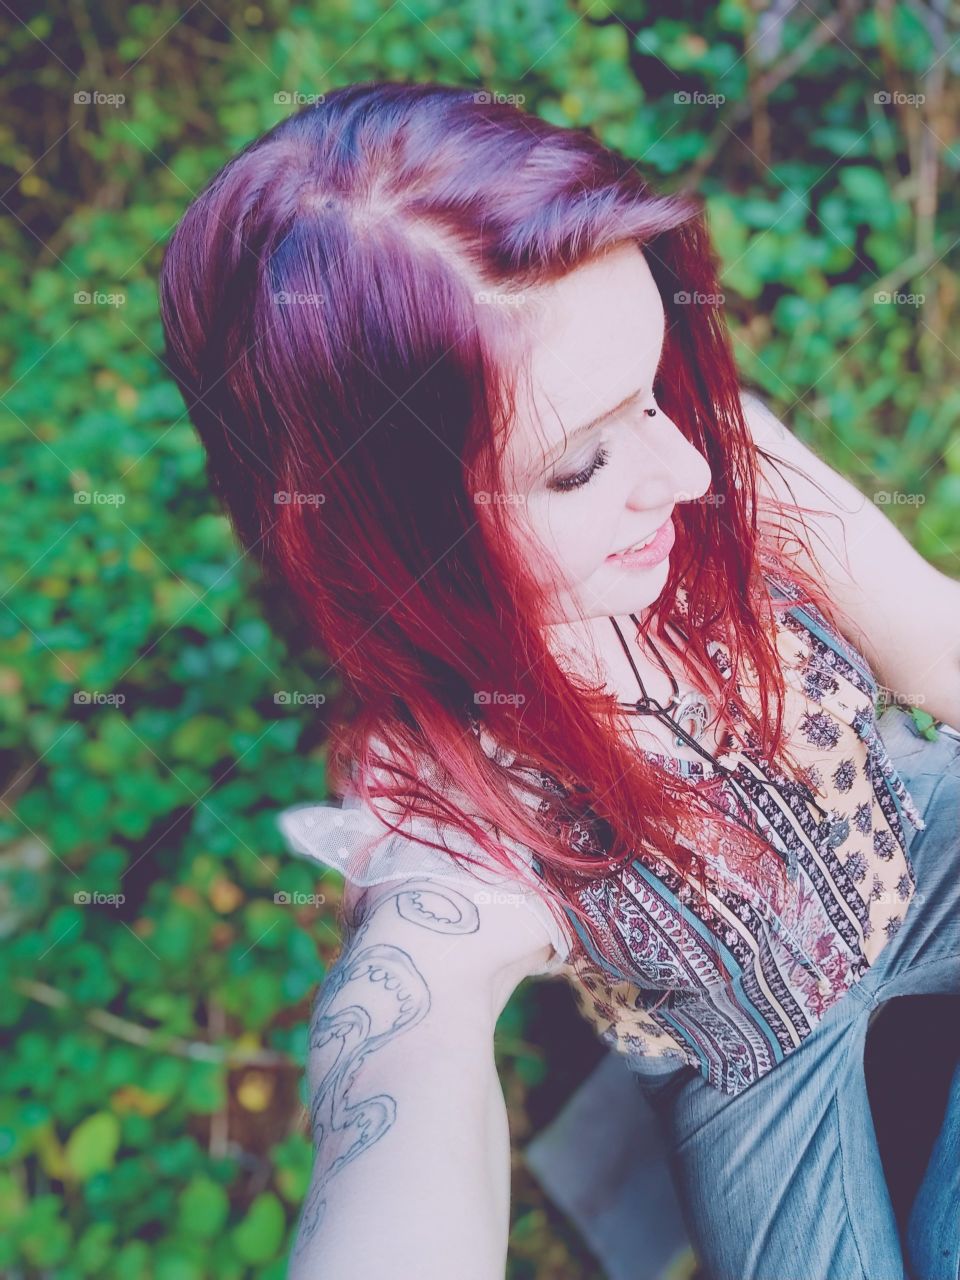 Downward perspective of purple and red hair, hippie style shirt out in nature. light exposure.